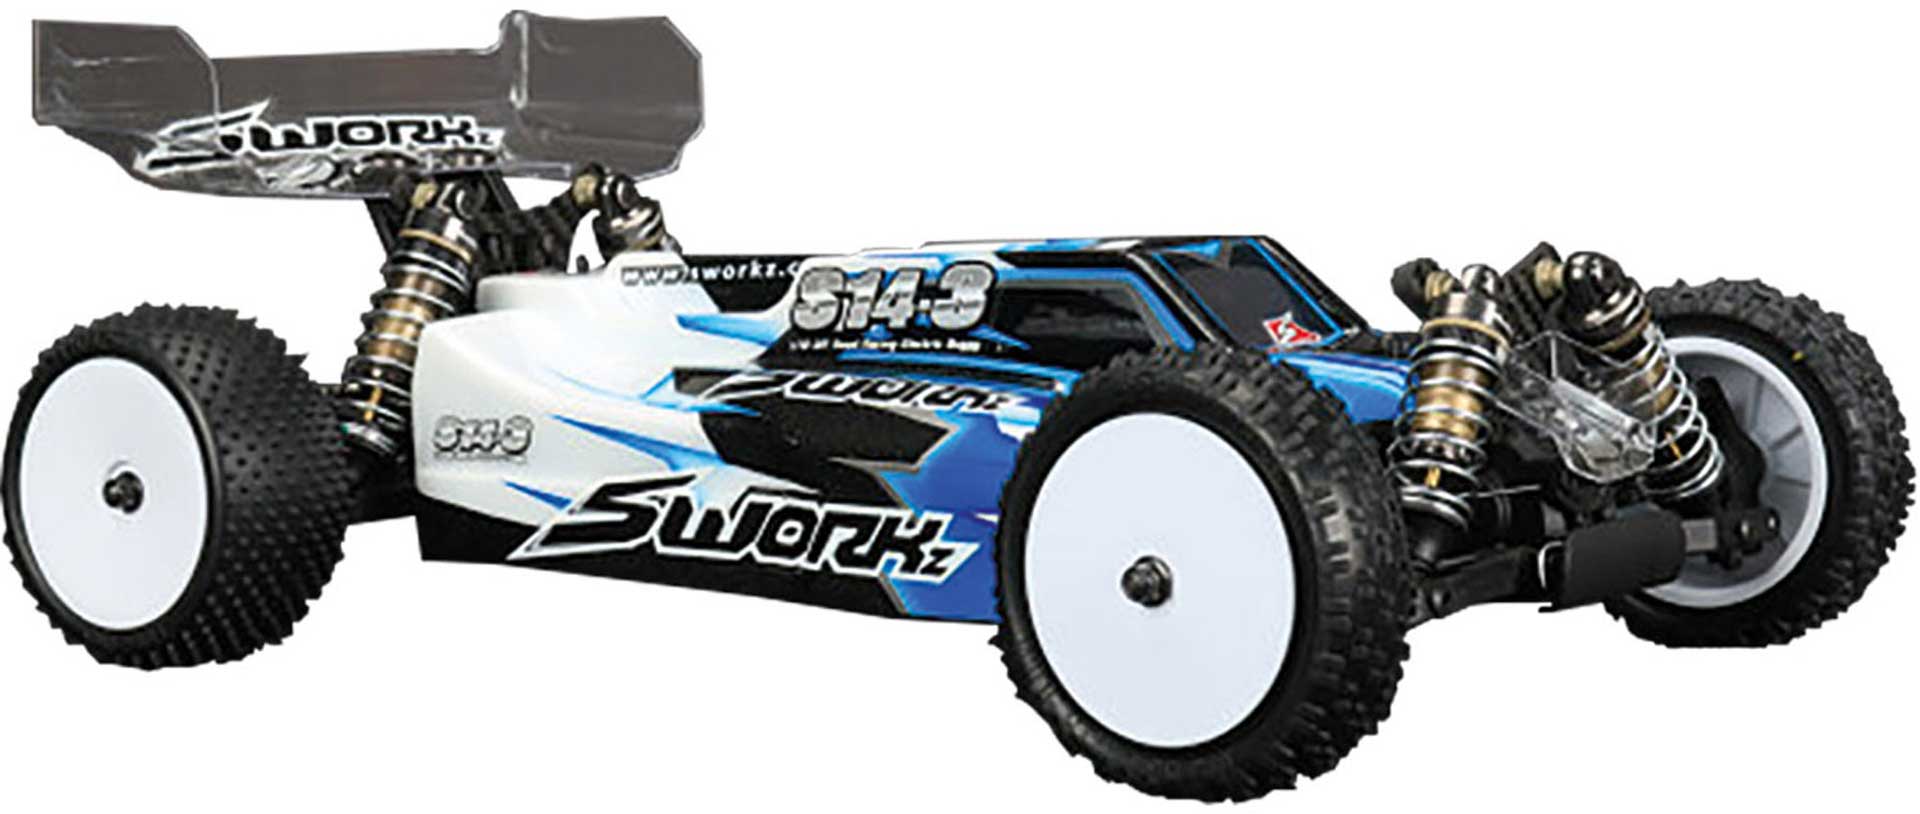 SWORKZ S14-3 1/10 4WD OFF-ROAD RACING BUGGY PRO KIT EP